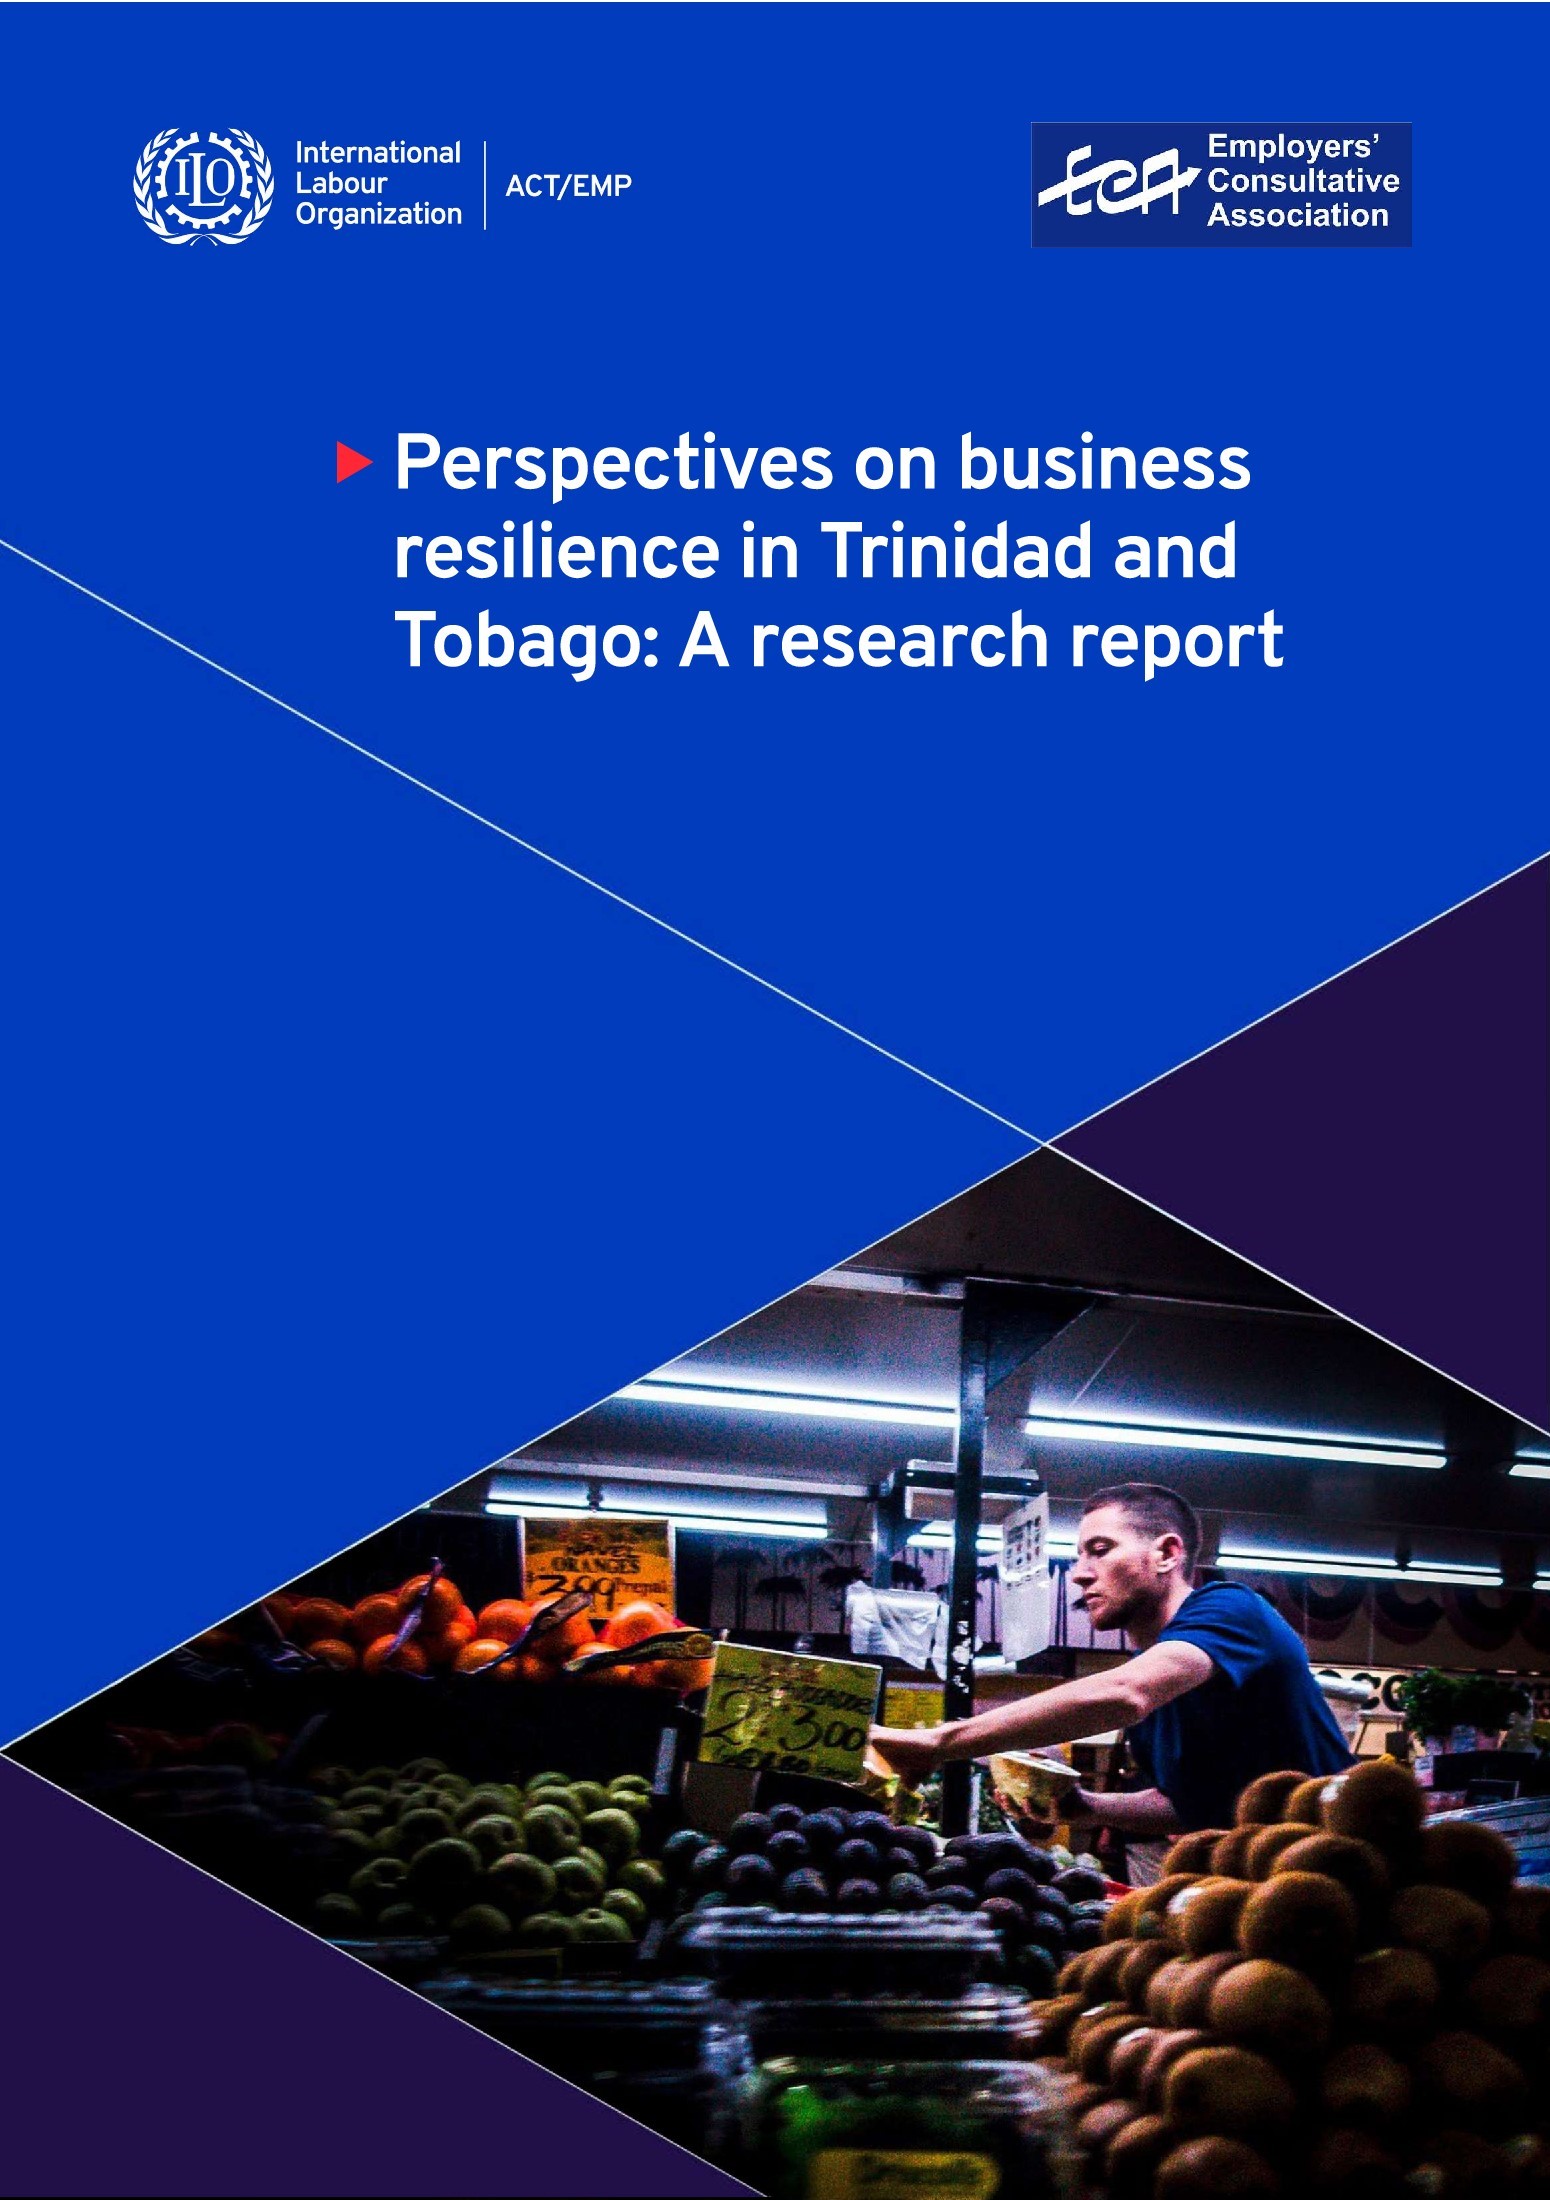 Research Report Cover Image